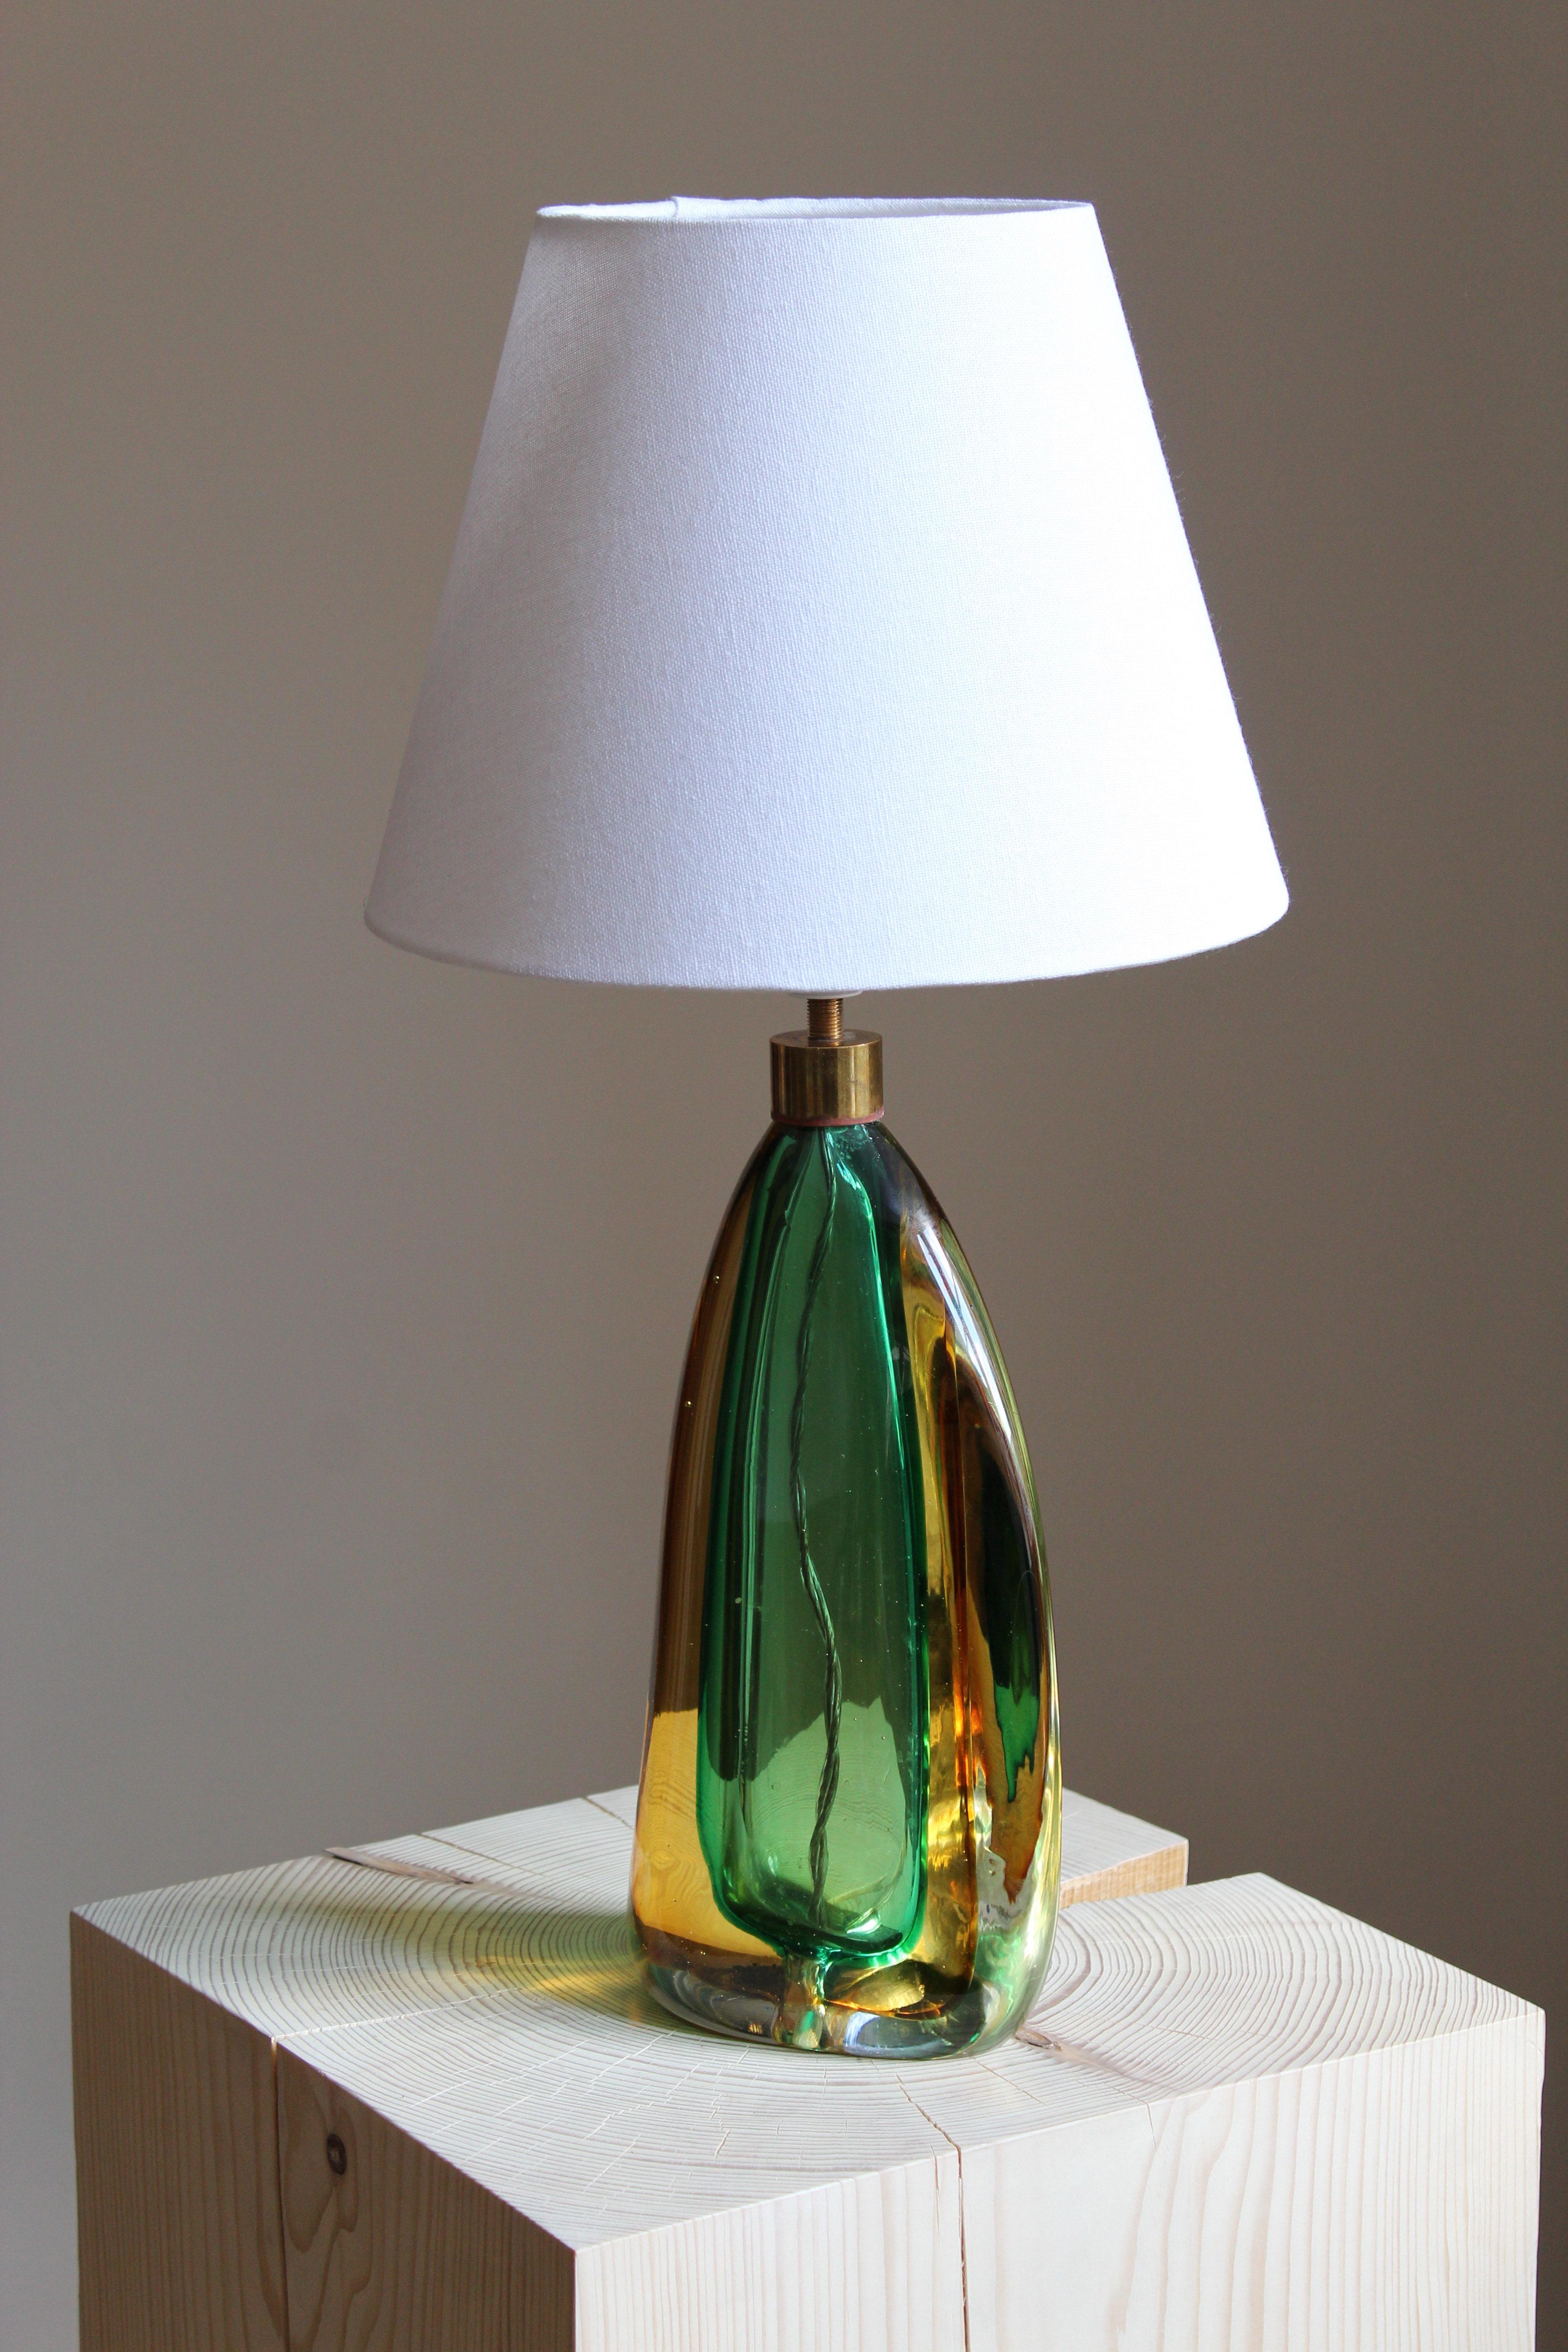 An organic table lamp. By an unknown Italian designer, produced in Italy, c. 1960s. Sourced in Denmark where this and similar lamps were retailed during the period.

Produced in colored Murano-glass and brass.

Sold without lampshade, stated